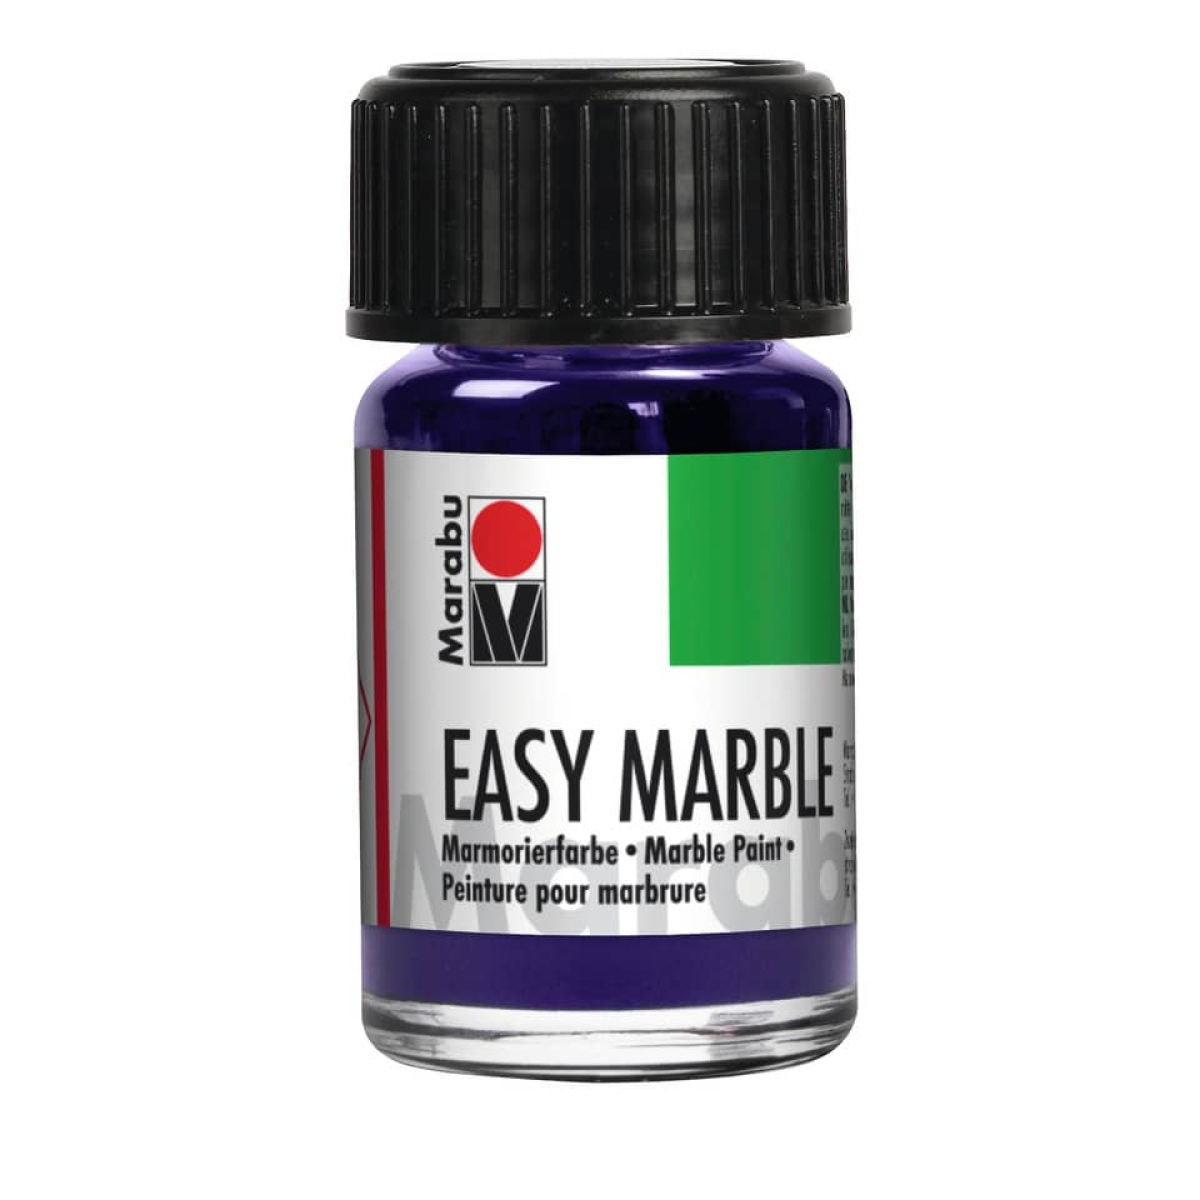 MARABUMarbling paint Easy Marble, 15ml, lavender 13050 039 007Article-No: 4007751469564